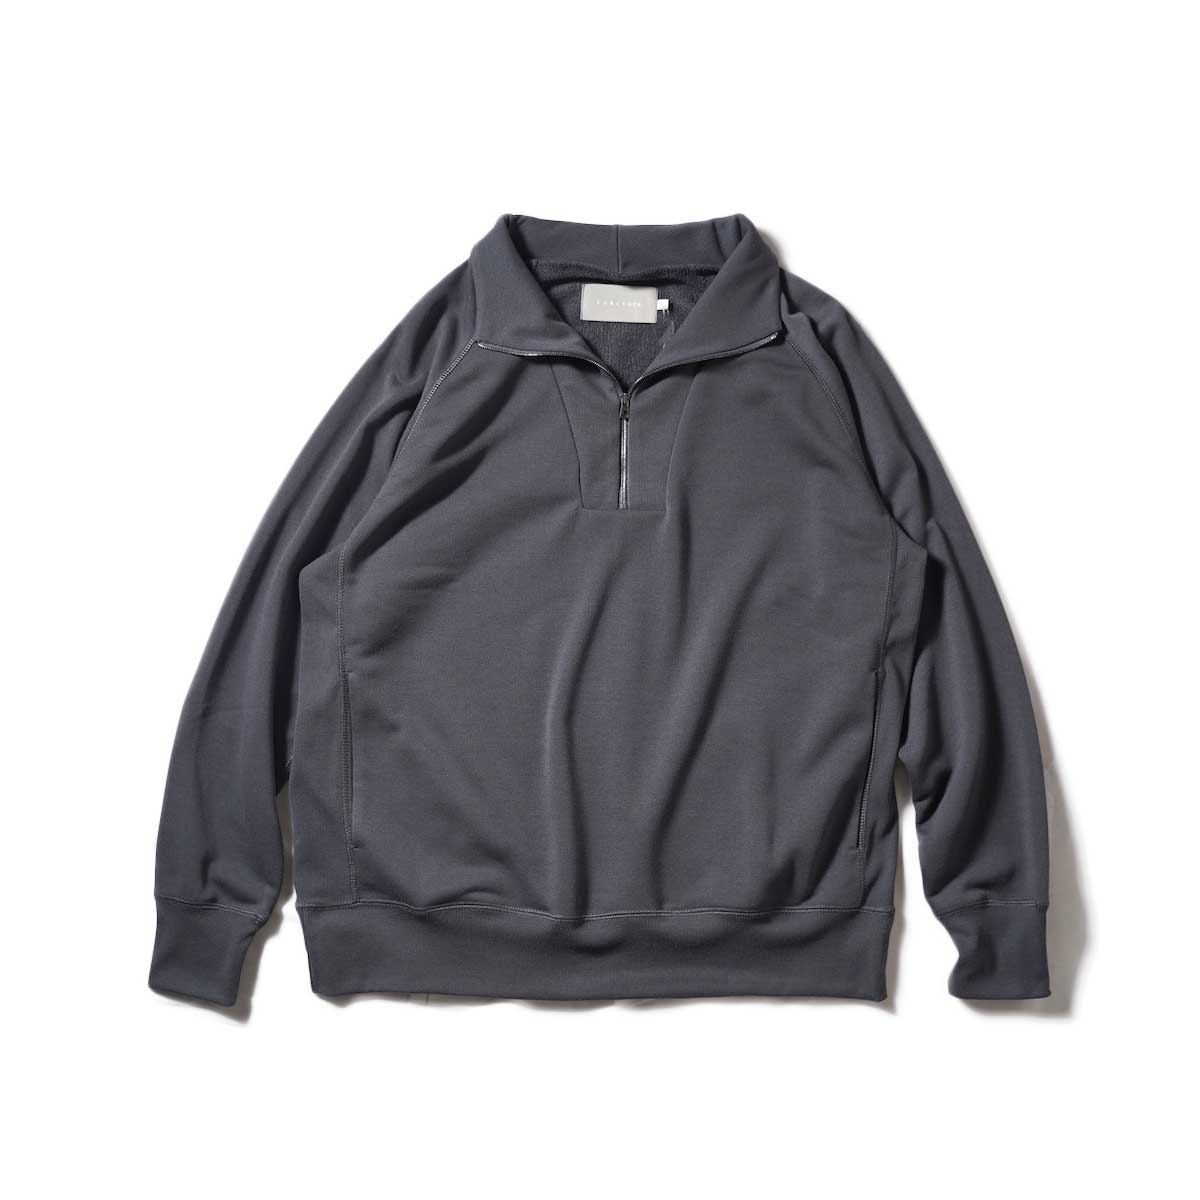 CURLY / DRY FRENCH TERRY HALF ZIP (Charcoal)